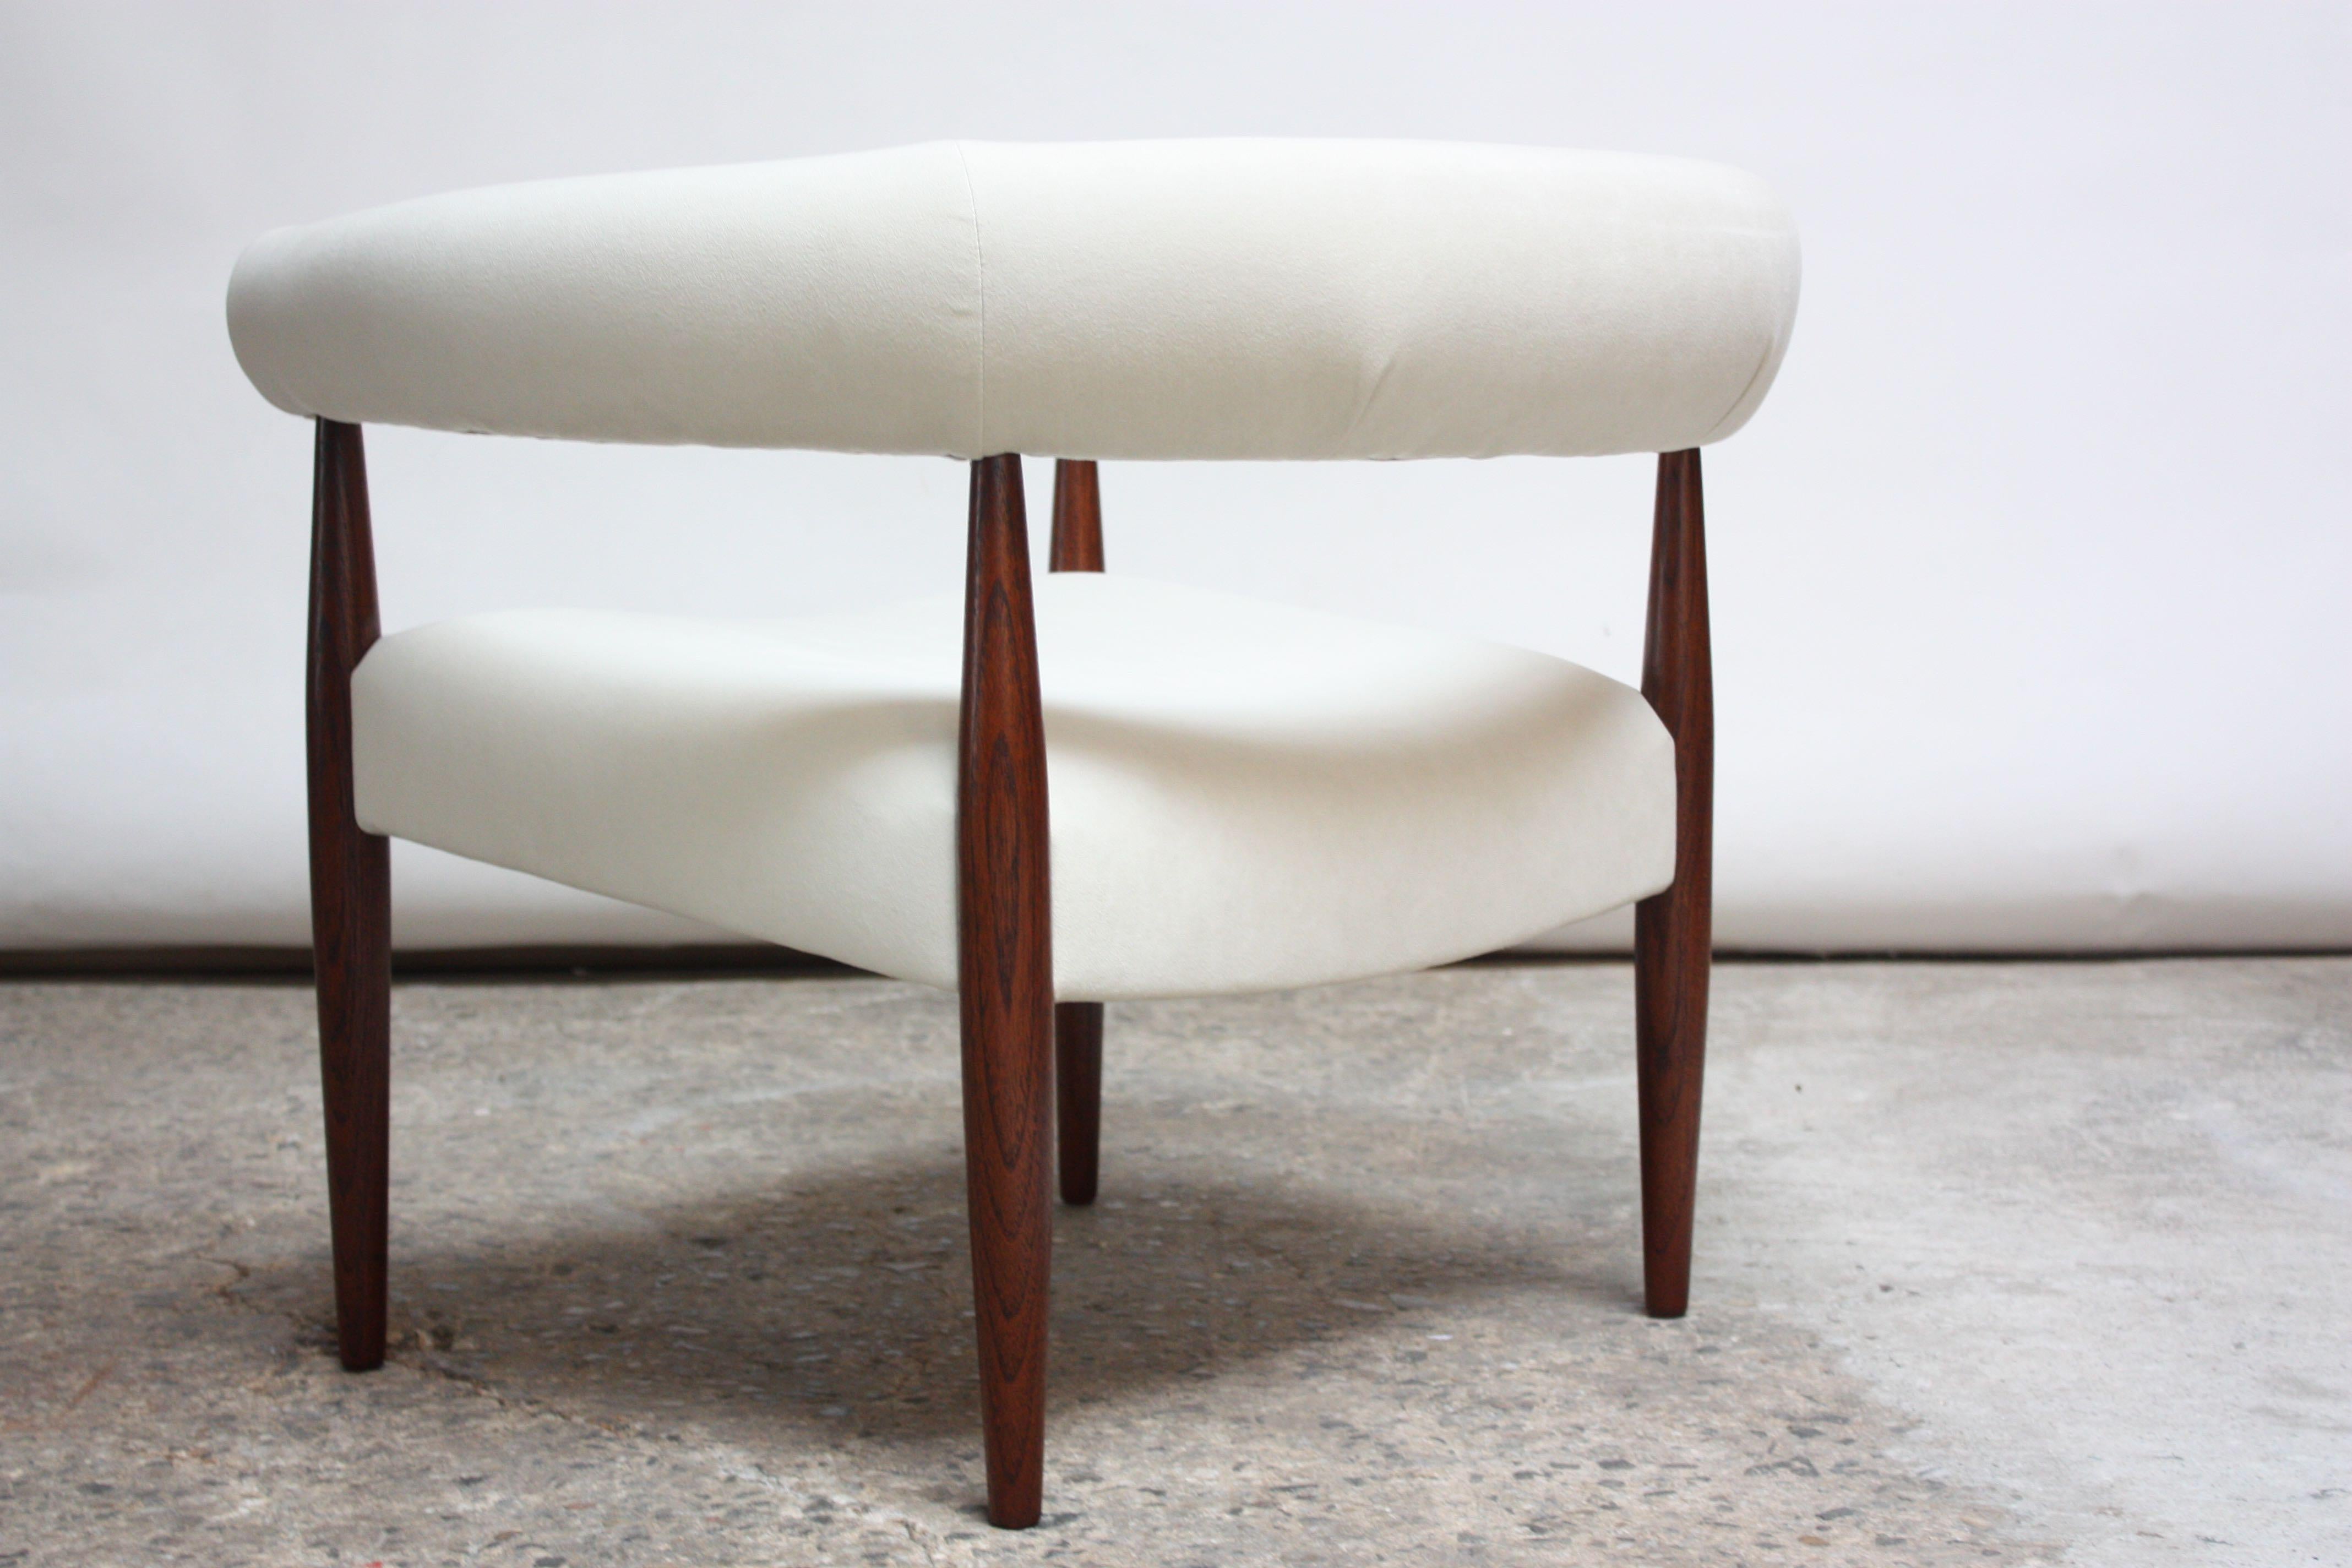 Stained Early Nanna and Jørgen Ditzel 'Ring' Chair in Suede and Teak